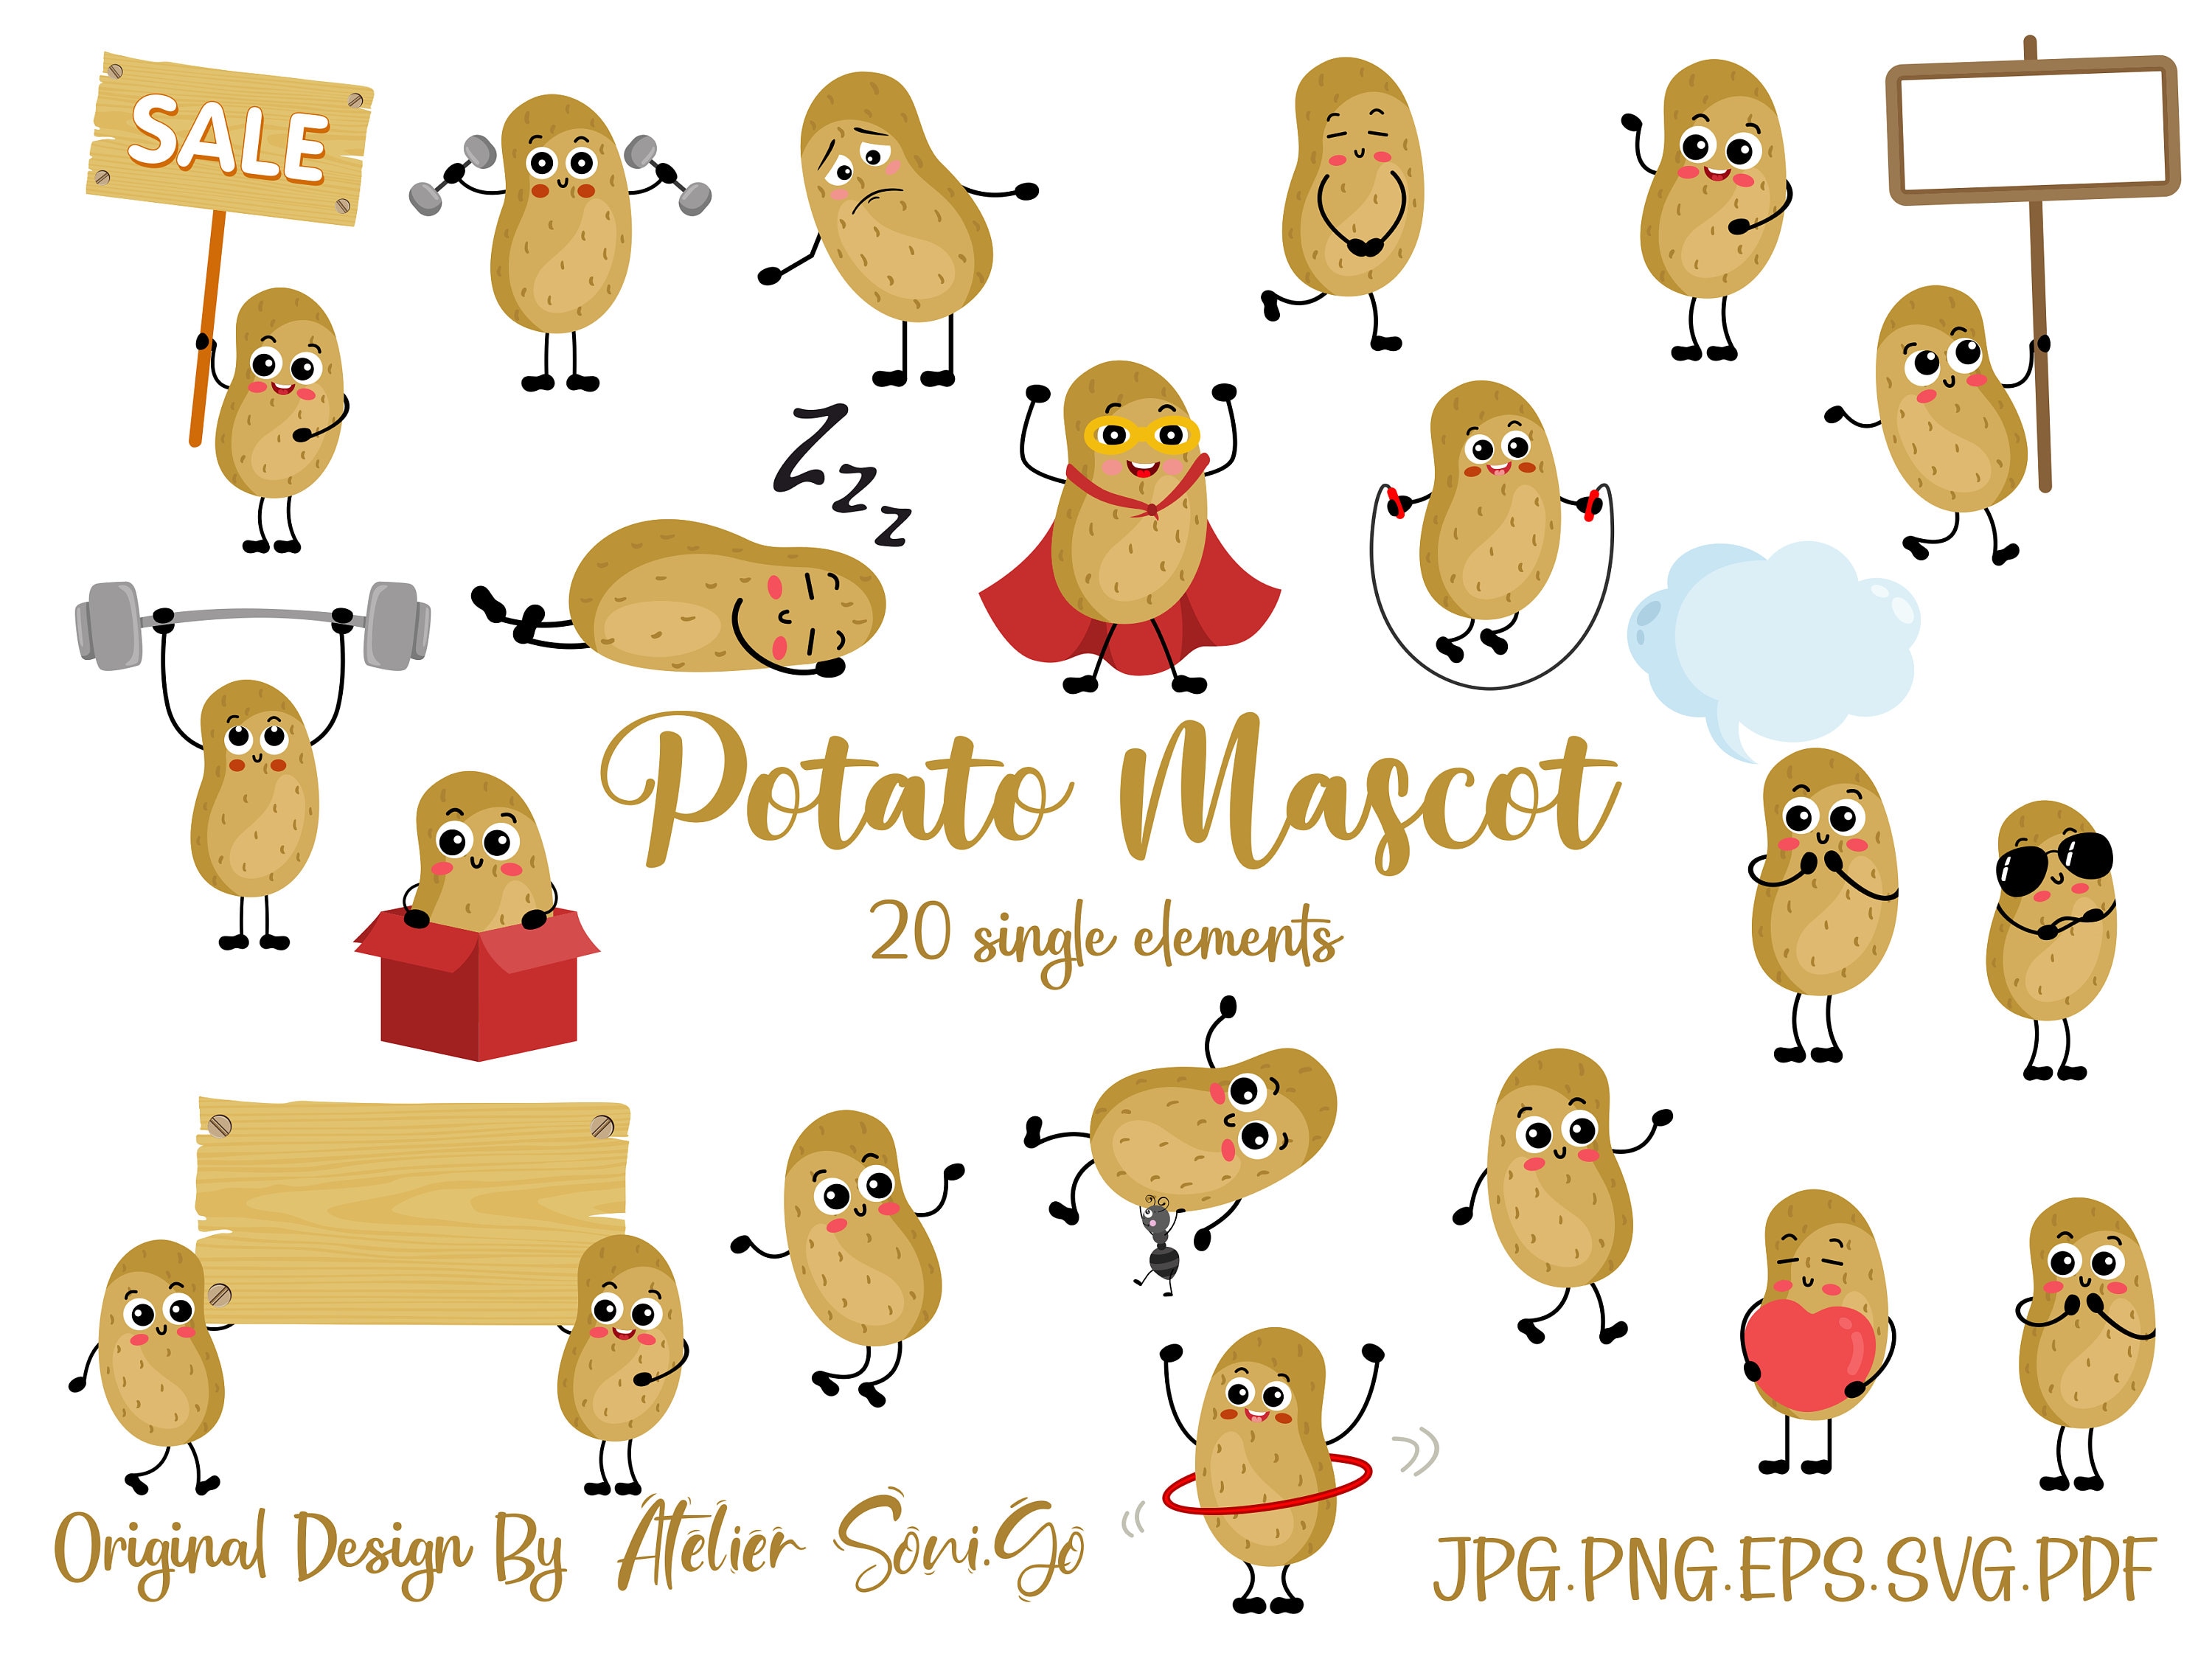 Whimsical potato clipart, Cute graphic of potatoes as a bee, unicorn,  mermaid, and a witch, PNG images for commercial use